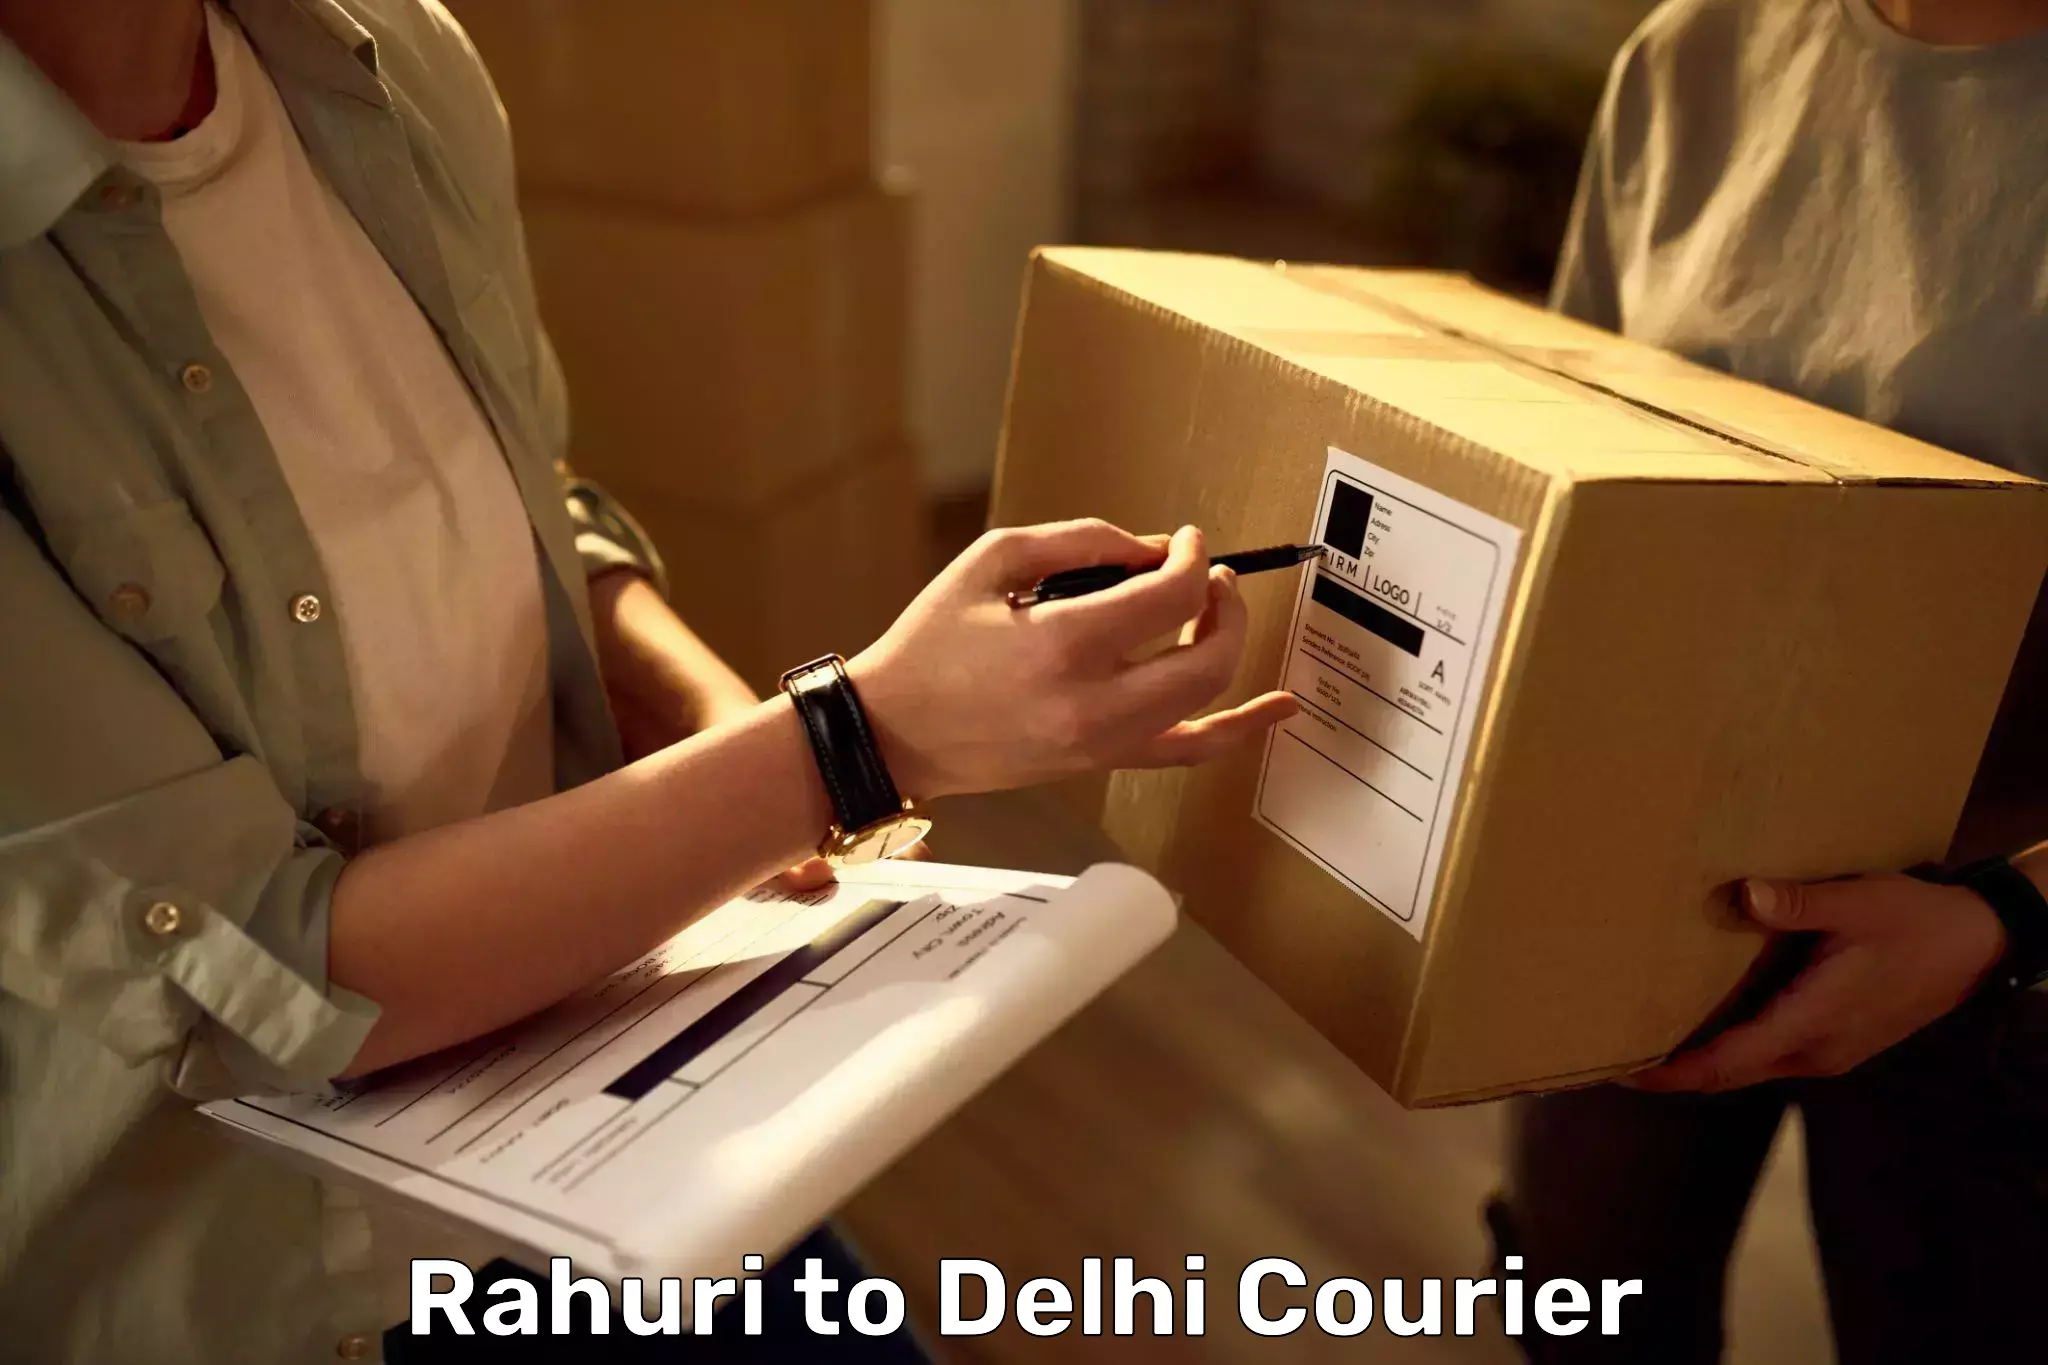 Personal effects shipping Rahuri to NCR